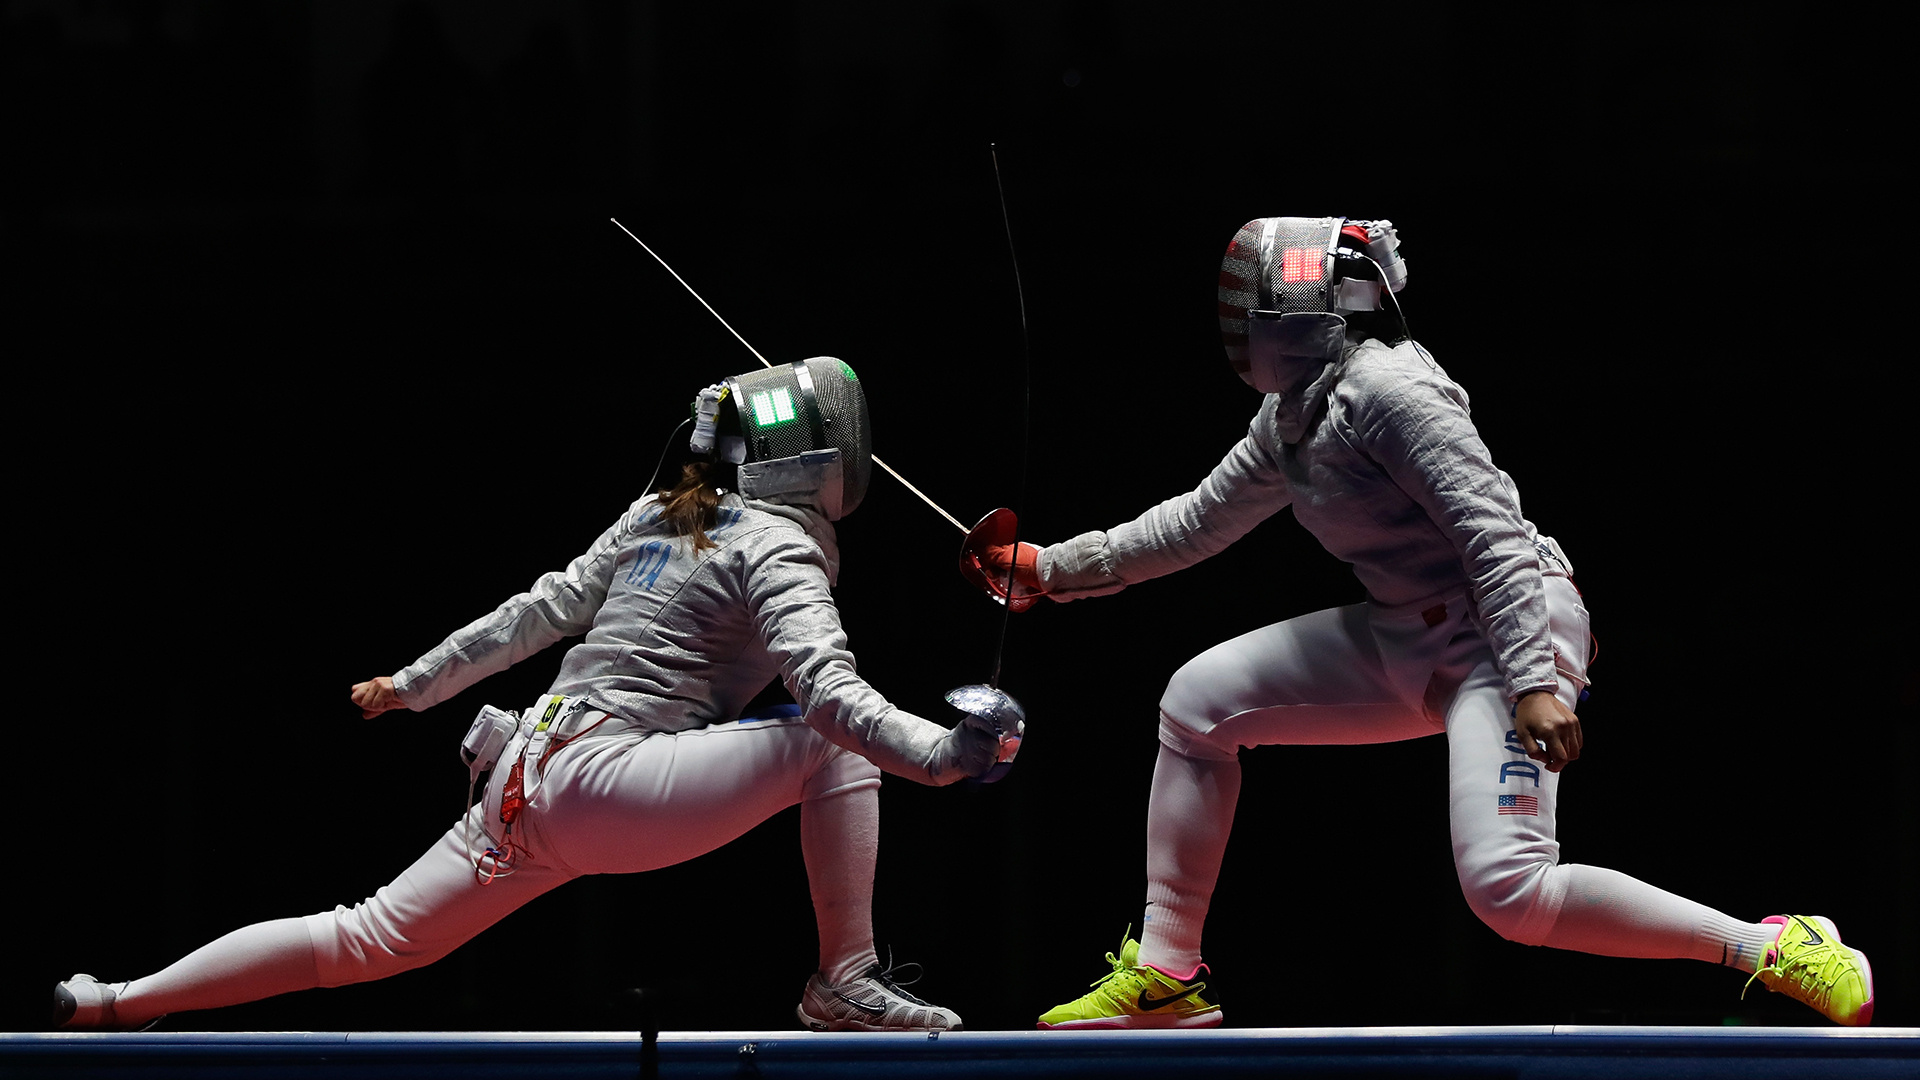 Fencing: Offensive and defensive techniques performed by Olympic athletes during a duel. 1920x1080 Full HD Wallpaper.